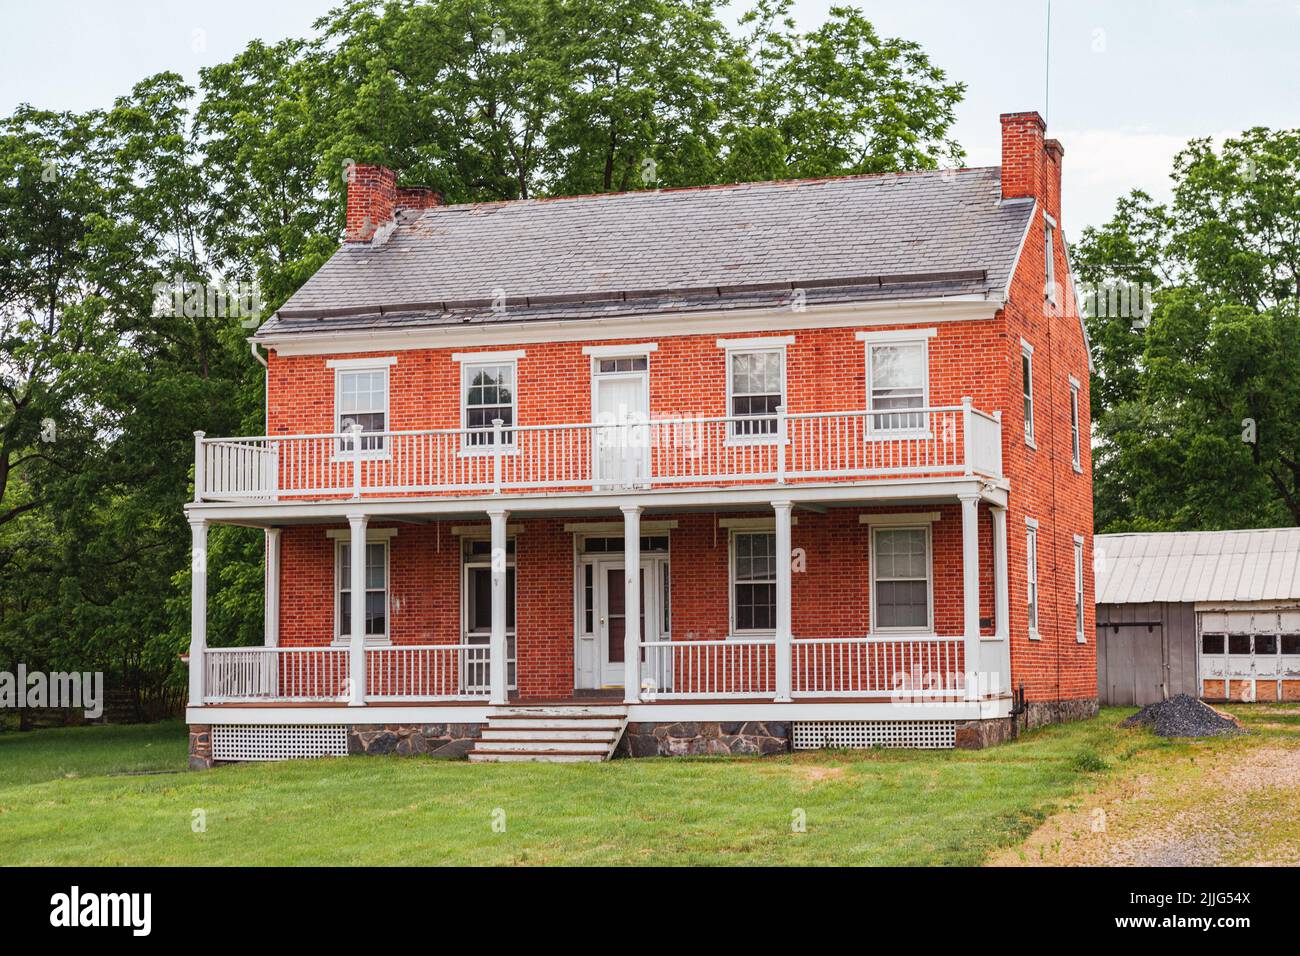 Gettysburg, PA, USA - June 2, 2012: The Josiah Benner Farm was used as a field hospital during the Battle of Gettysburg. Stock Photo